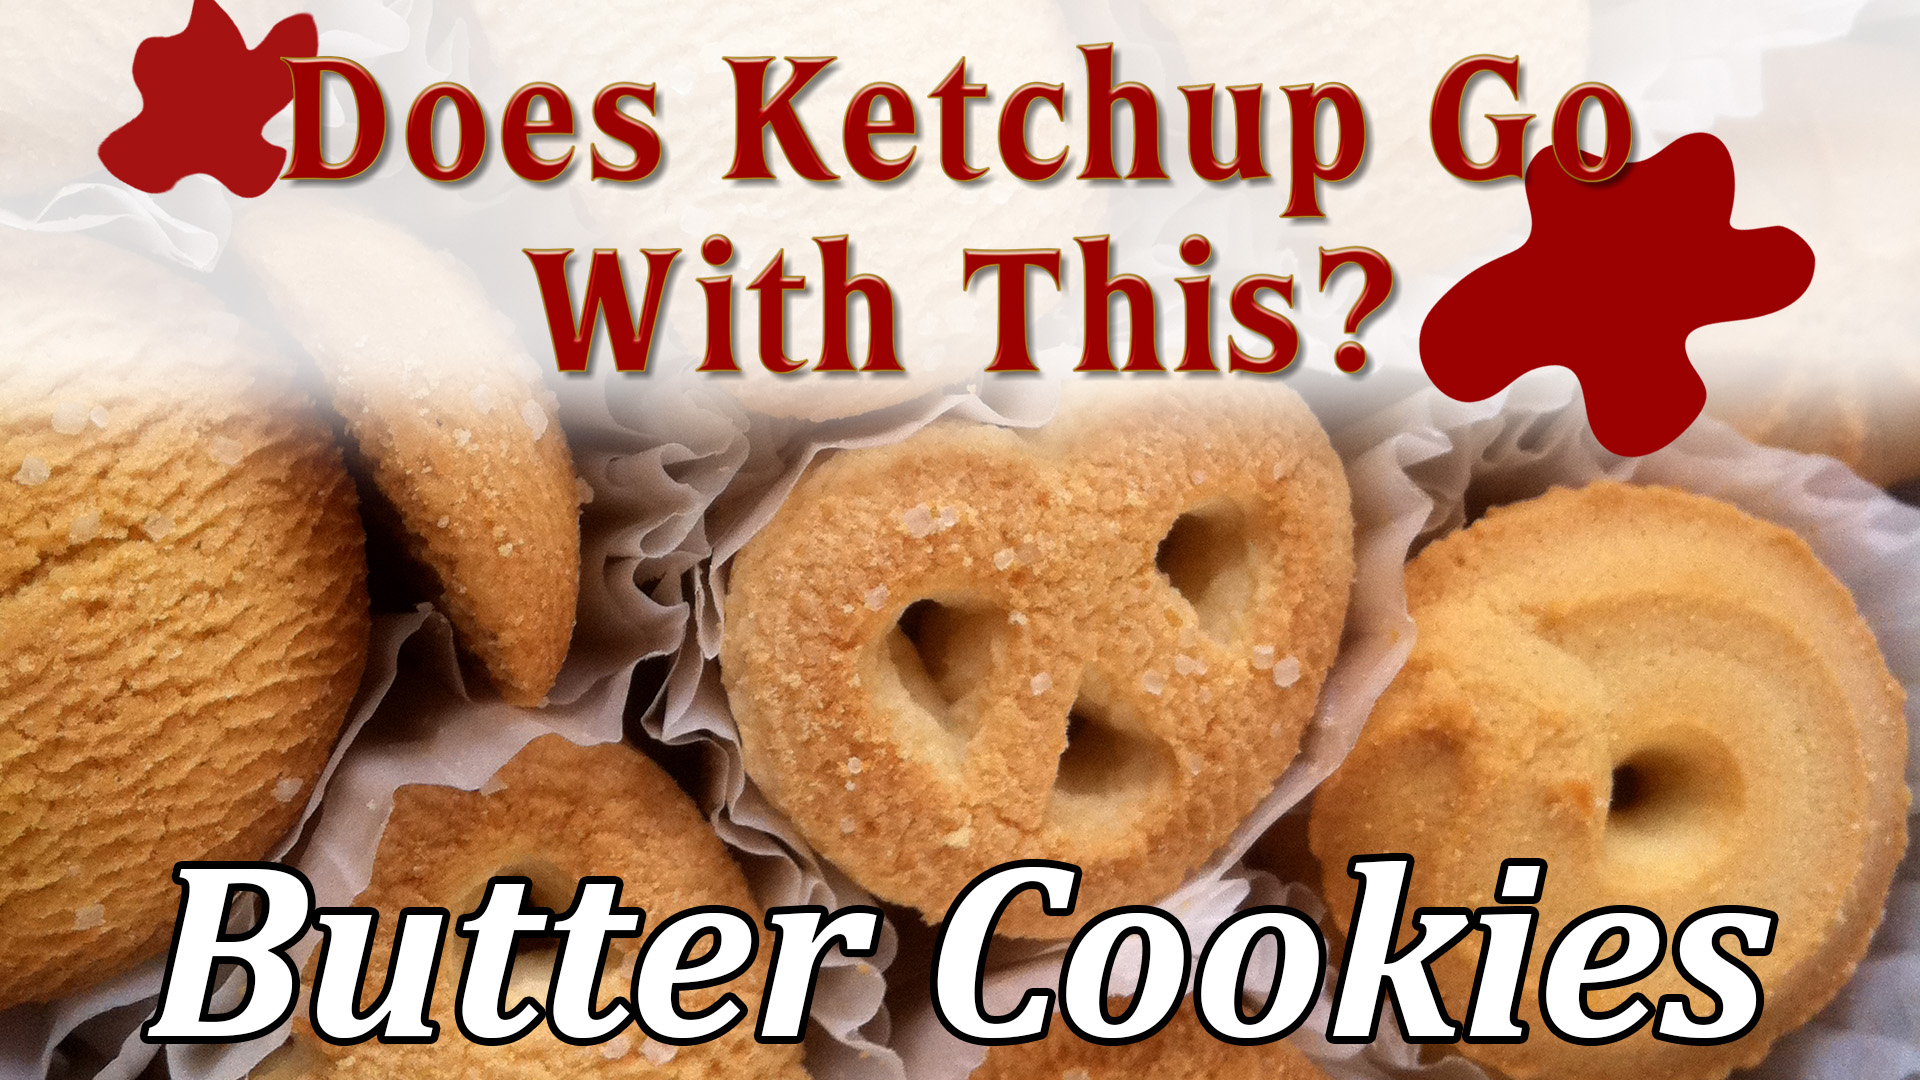 Does Ketchup Go With This - Butter Cookies